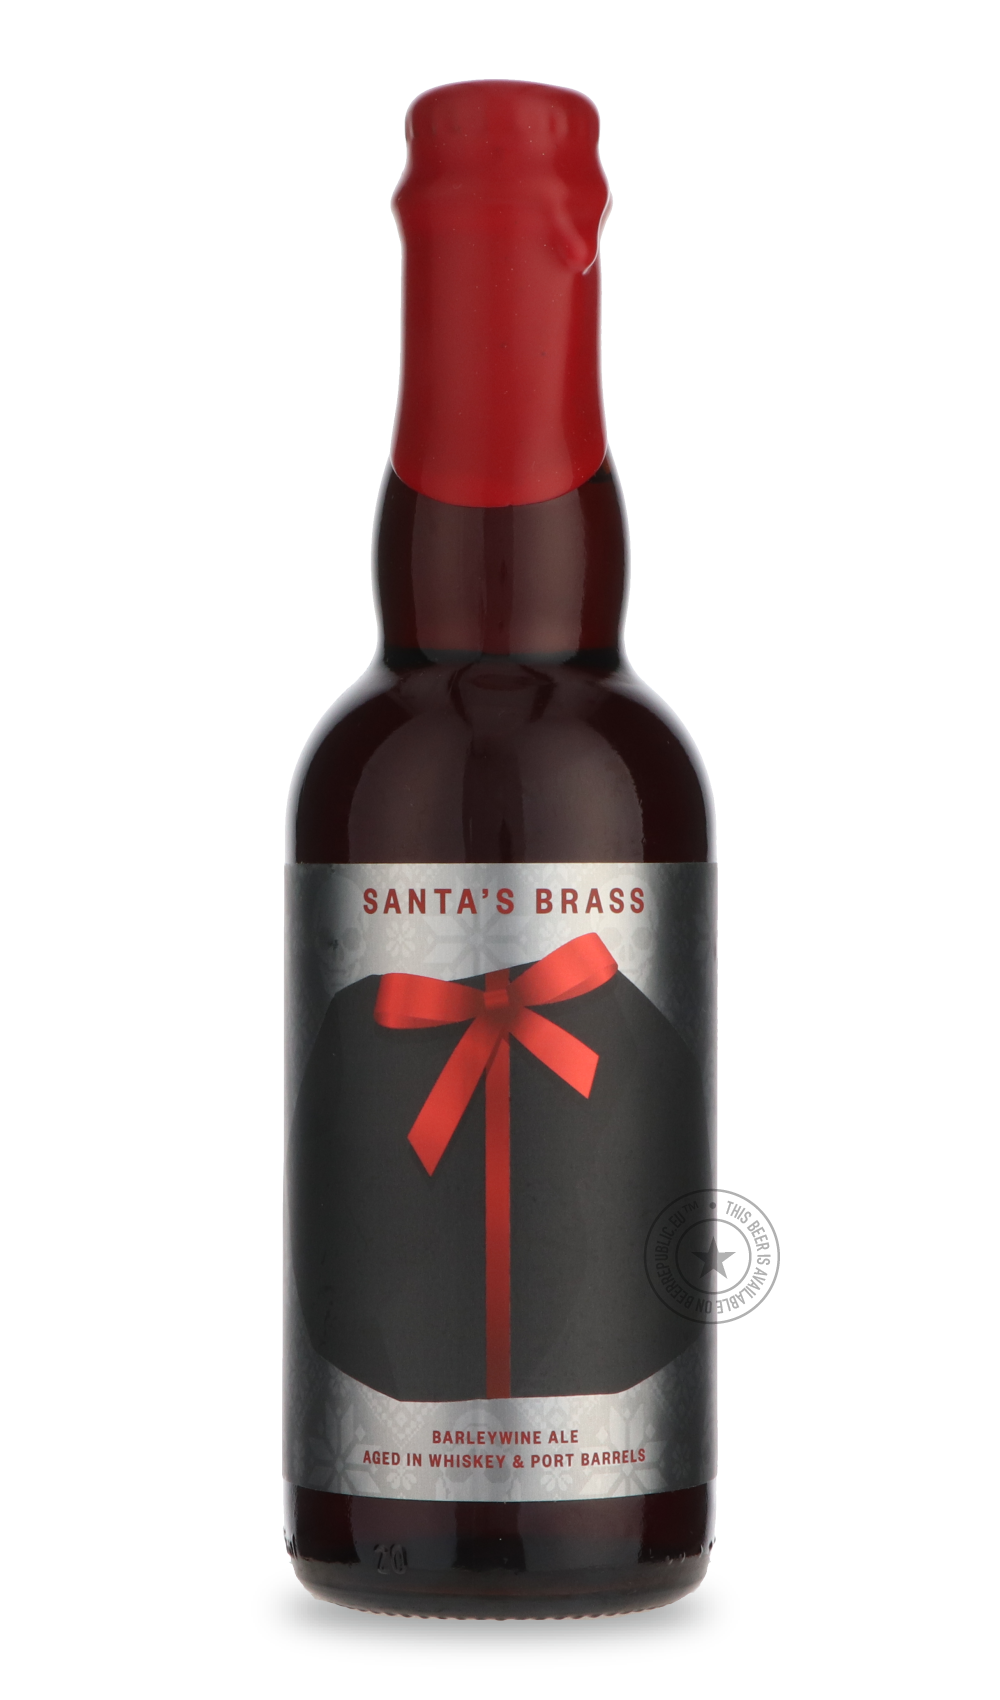 -Drake's- Santas Brass (2022)-Brown & Dark- Only @ Beer Republic - The best online beer store for American & Canadian craft beer - Buy beer online from the USA and Canada - Bier online kopen - Amerikaans bier kopen - Craft beer store - Craft beer kopen - Amerikanisch bier kaufen - Bier online kaufen - Acheter biere online - IPA - Stout - Porter - New England IPA - Hazy IPA - Imperial Stout - Barrel Aged - Barrel Aged Imperial Stout - Brown - Dark beer - Blond - Blonde - Pilsner - Lager - Wheat - Weizen - Am